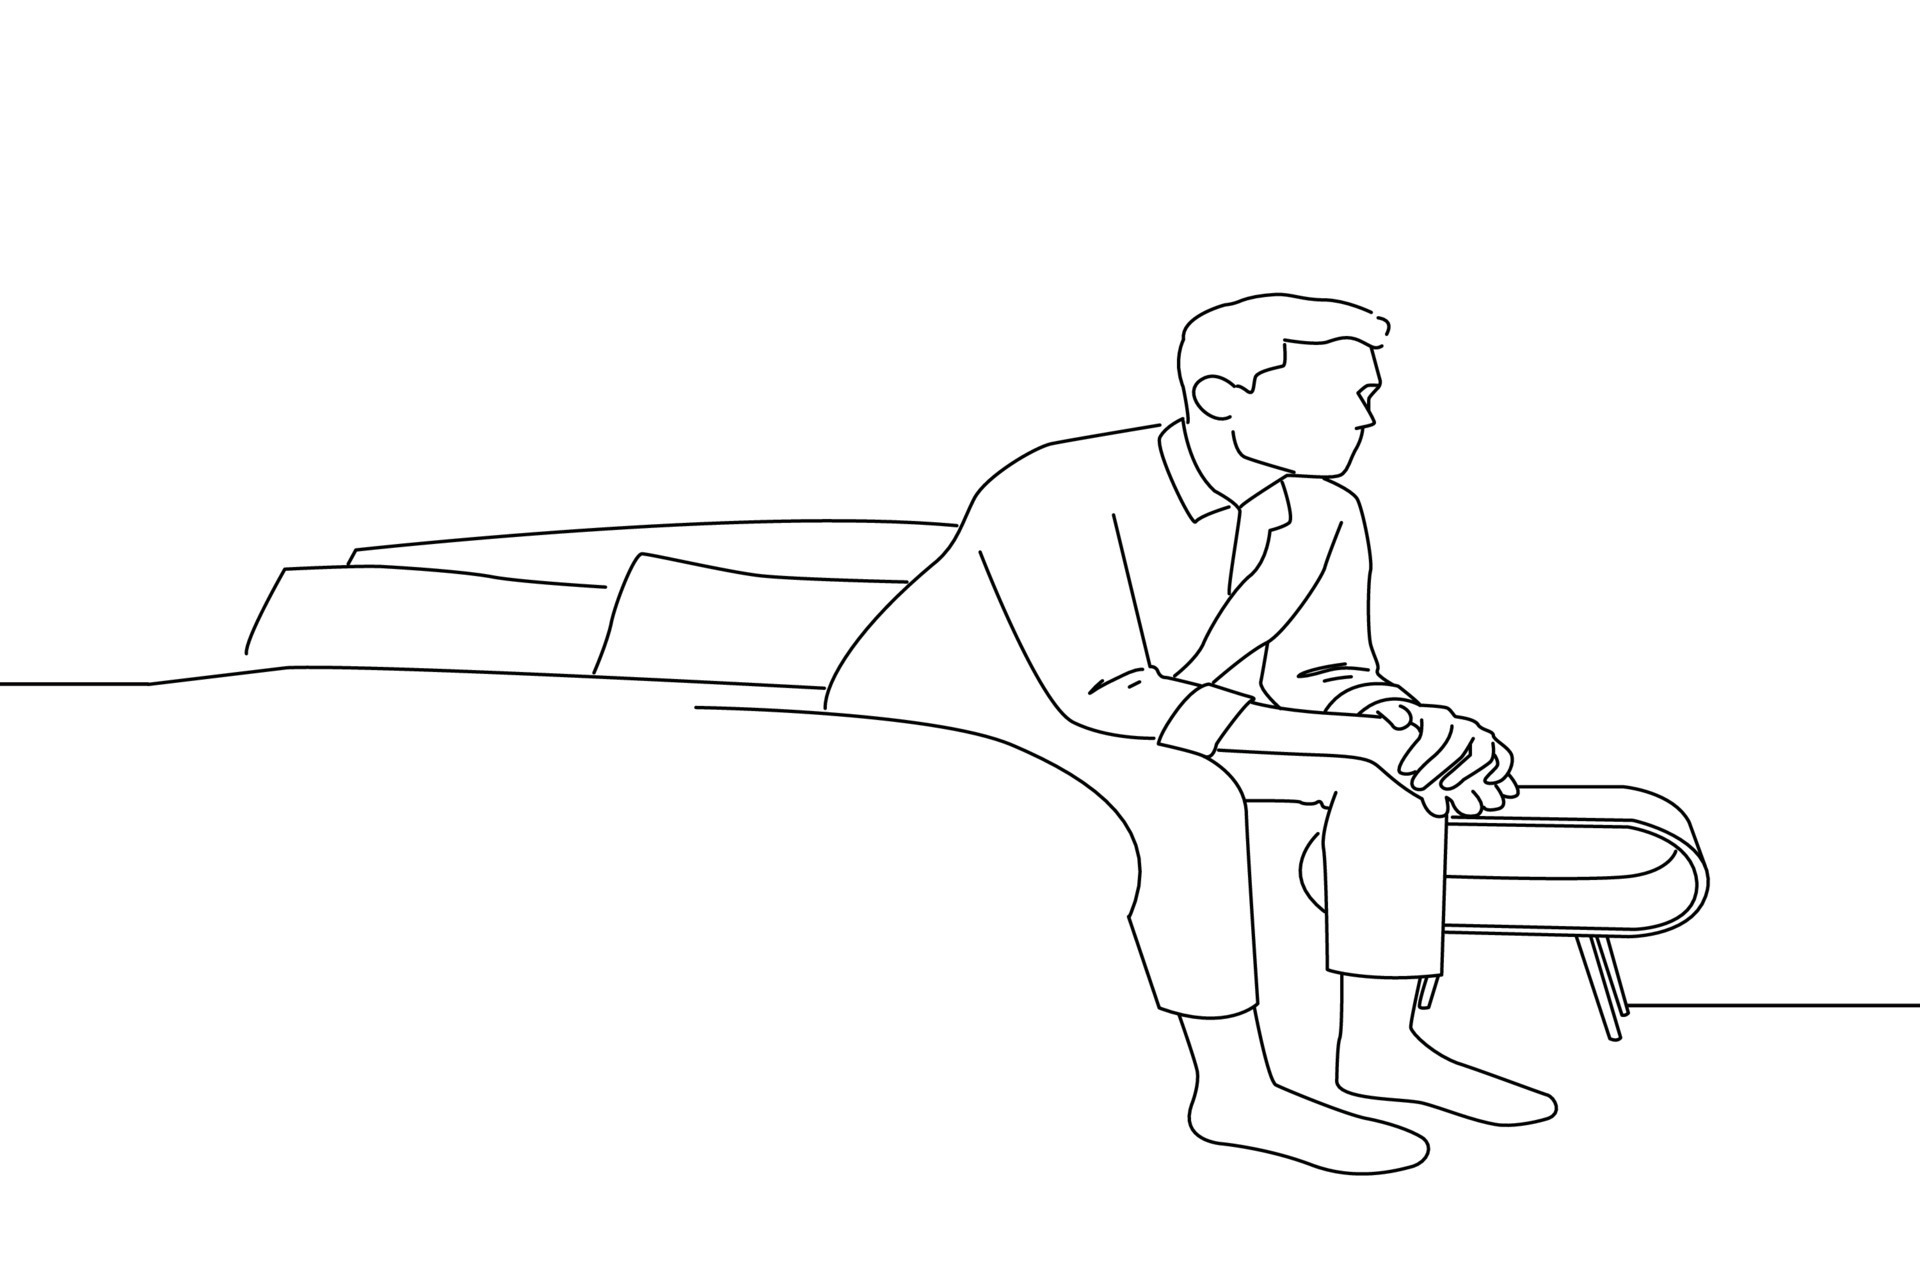 Sketch of man sitting on bench with feet up on bench and hipster haircut  Hand drawn vector linear illustration  Man sitting Human figure sketches  Bench drawing